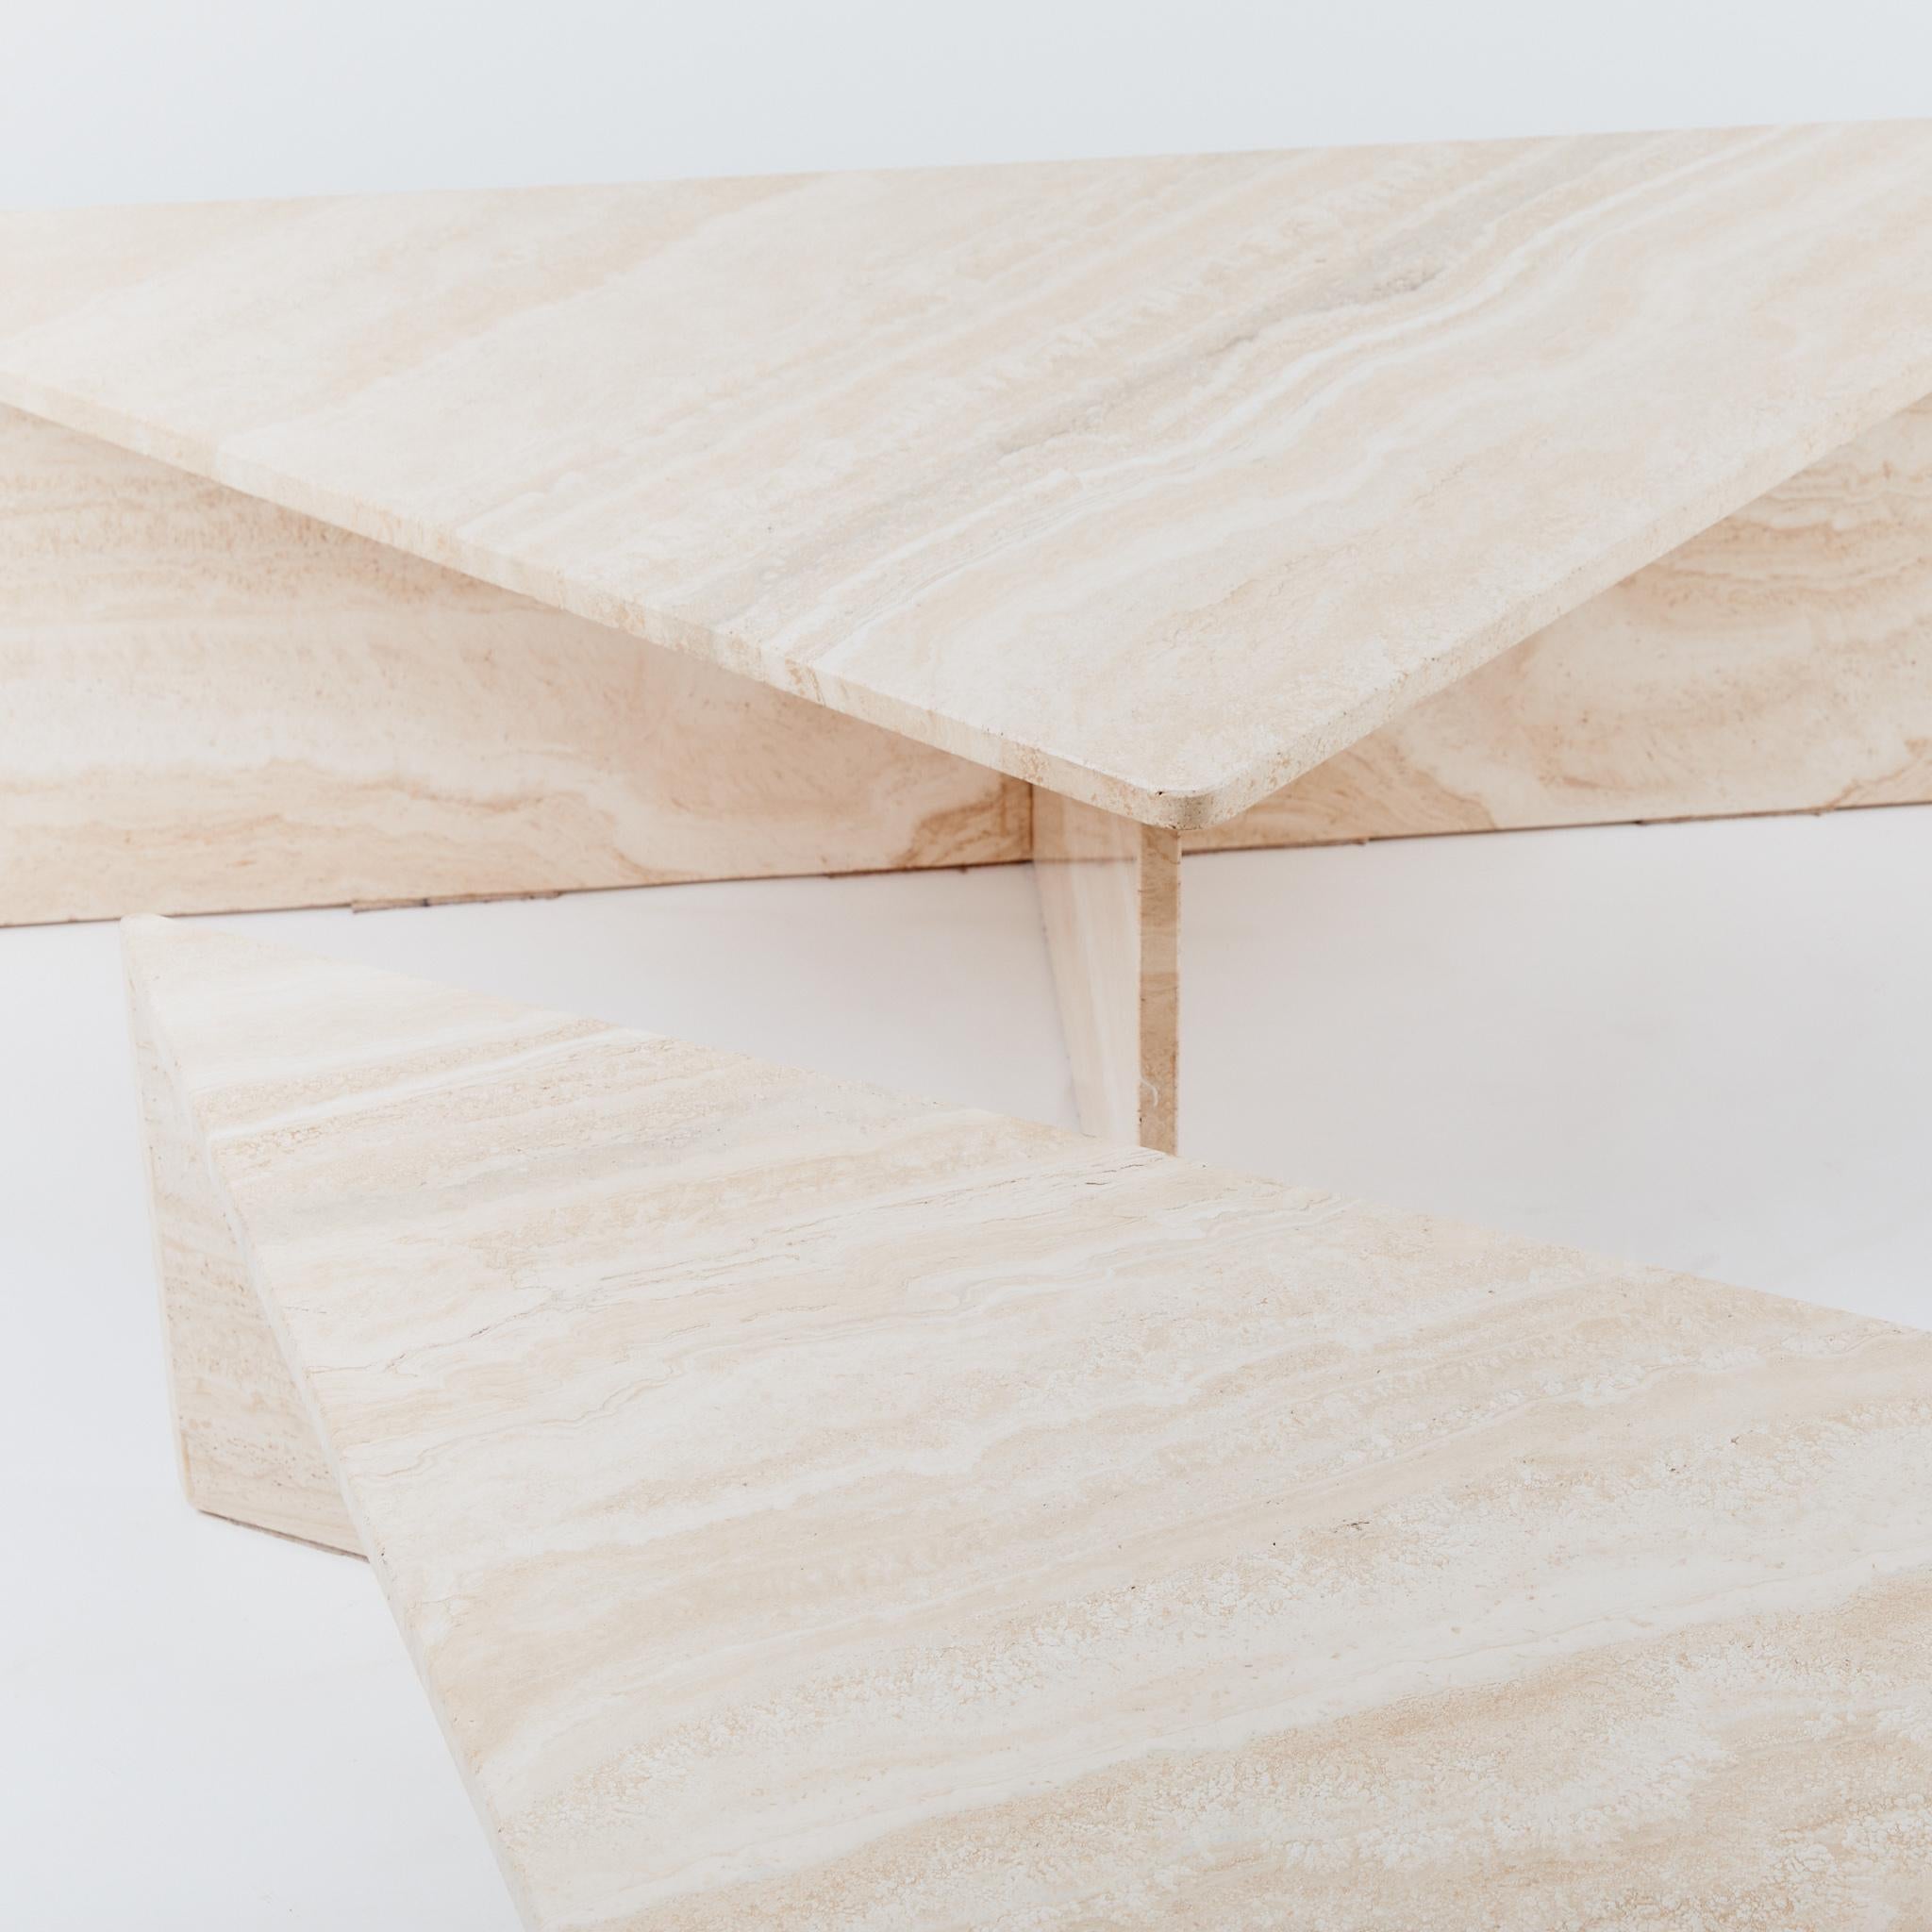 This statement coffee table consists of two triangular pieces with different heights which can be placed in a variety of positions. In pale tones the marble has a polished finish and has felt pads on the base to protect the piece.

Dimensions: